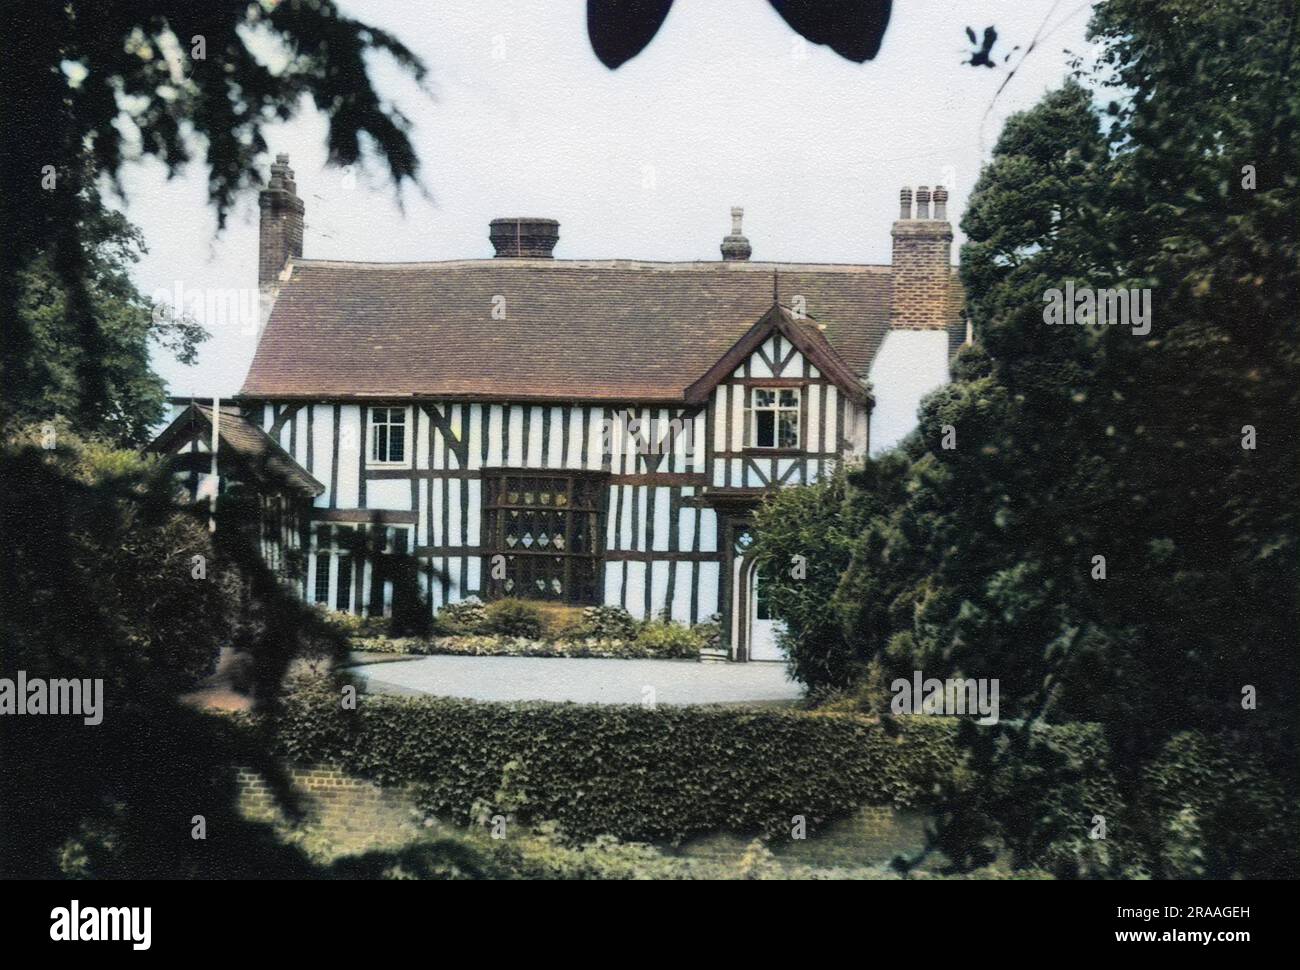 View of the Old Rectory, a Grade I listed building in the village of Gawsworth, Cheshire.  It dates back to the 15th or 16th century, and is timber framed.  There have been reports of paranormal activity there.     Date: 20th century Stock Photo